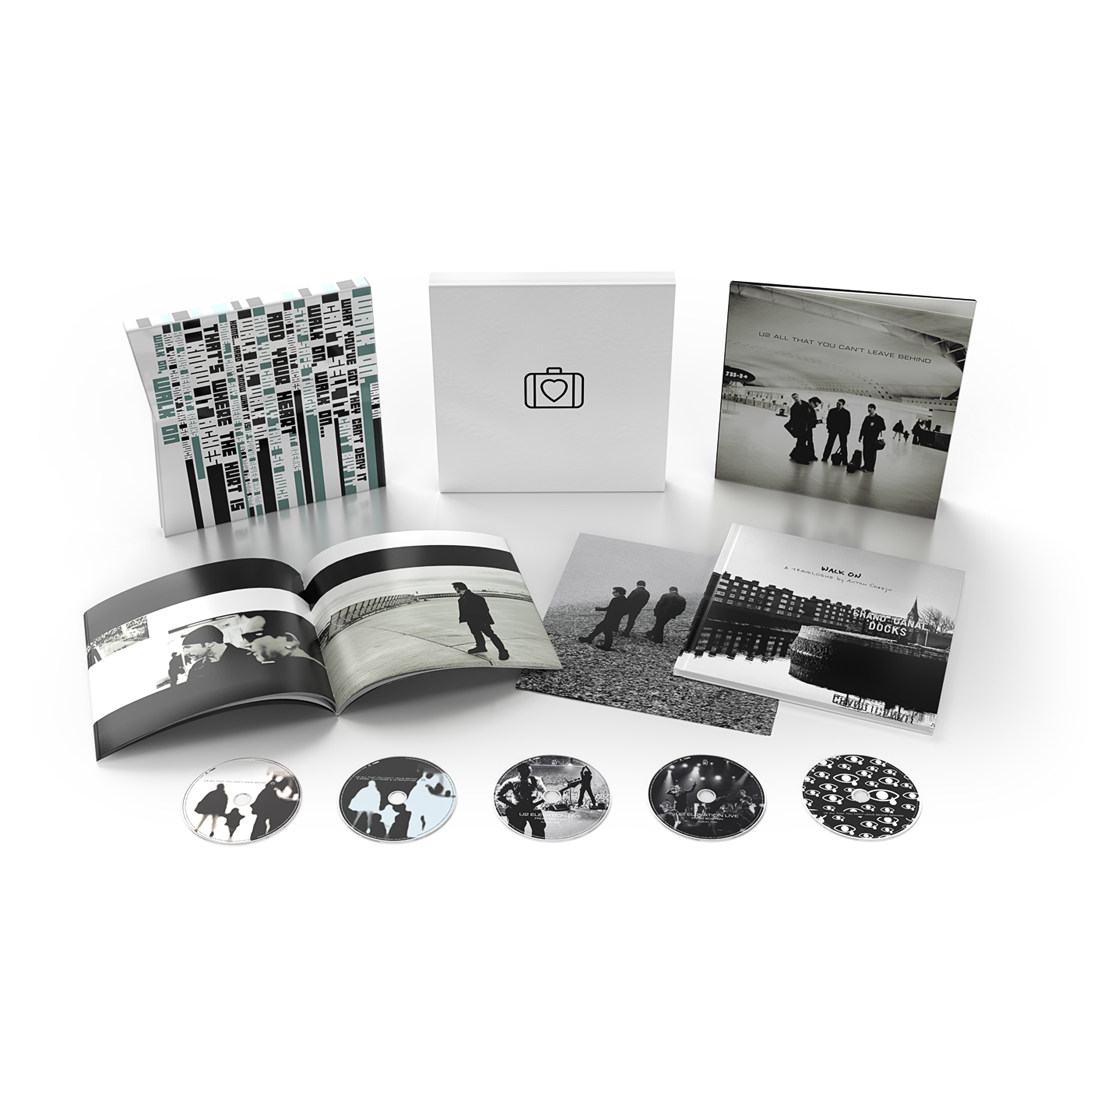 U2 - All That You Can't Leave Behind Super Deluxe CD Box Set